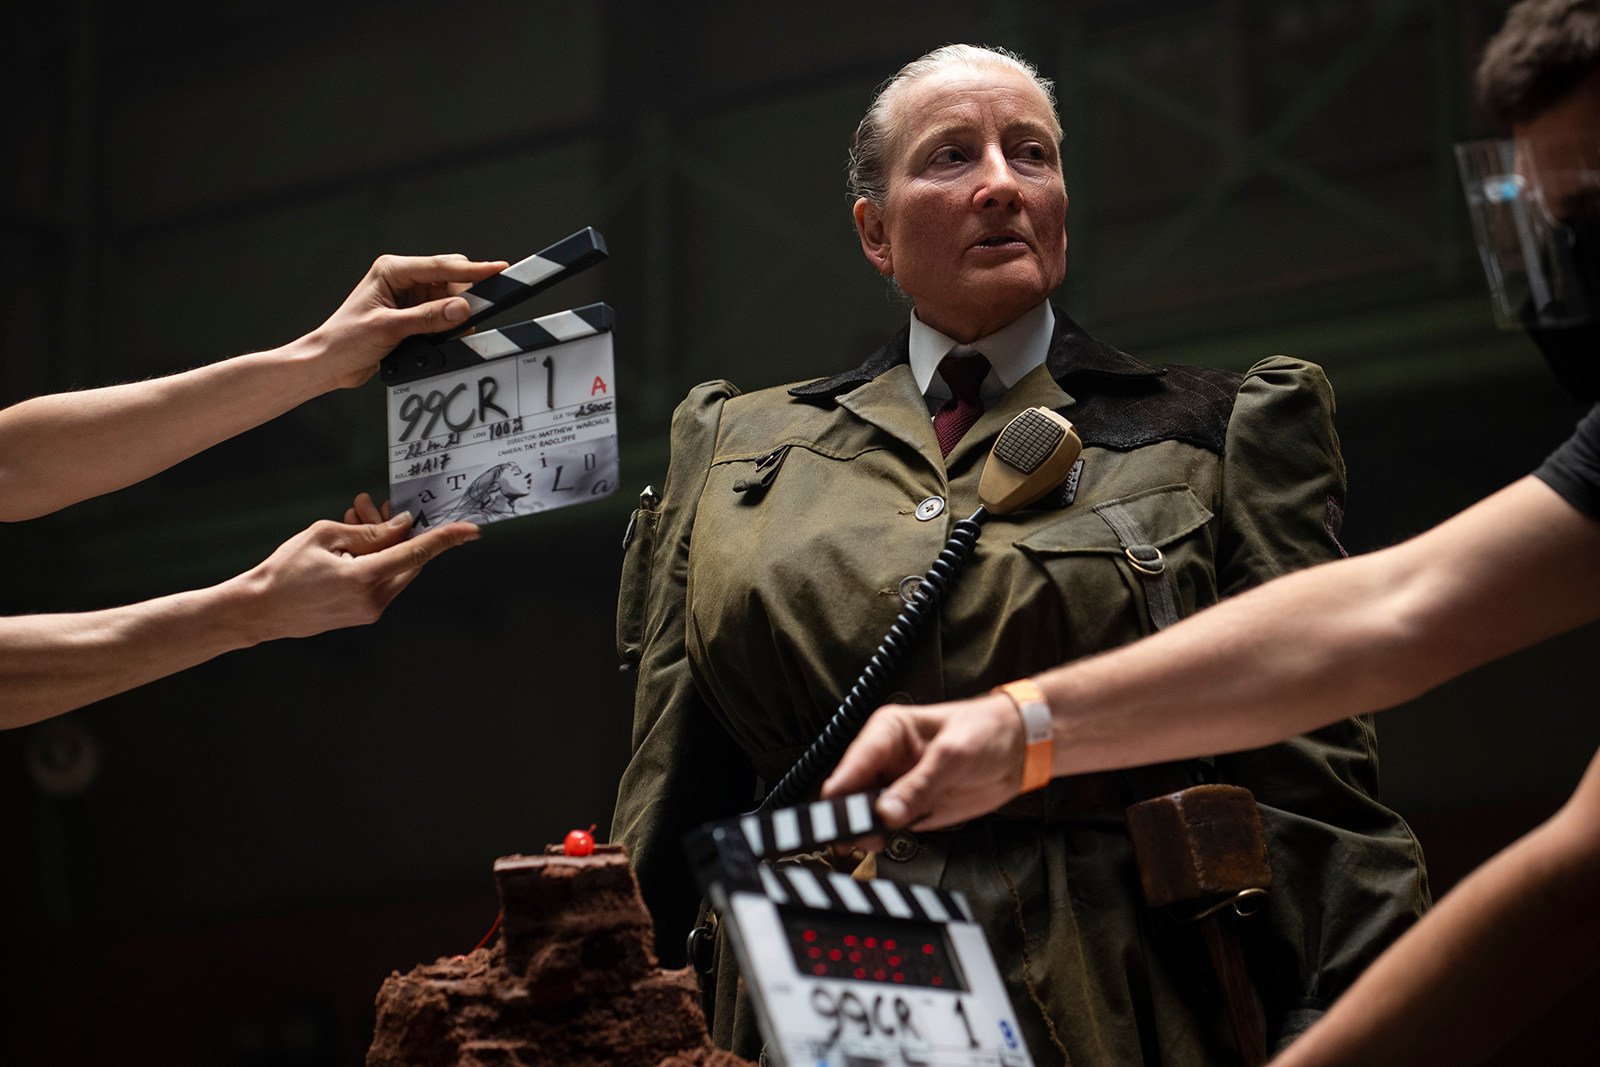 Emma Thompson as the villainous Agatha Trunchbull in “Roald Dahl’s Matilda the Musical” on Netflix. When the director first saw her in costume, he found her “genuinely scary”. Photo: Dan Smith/Netflix/TNS